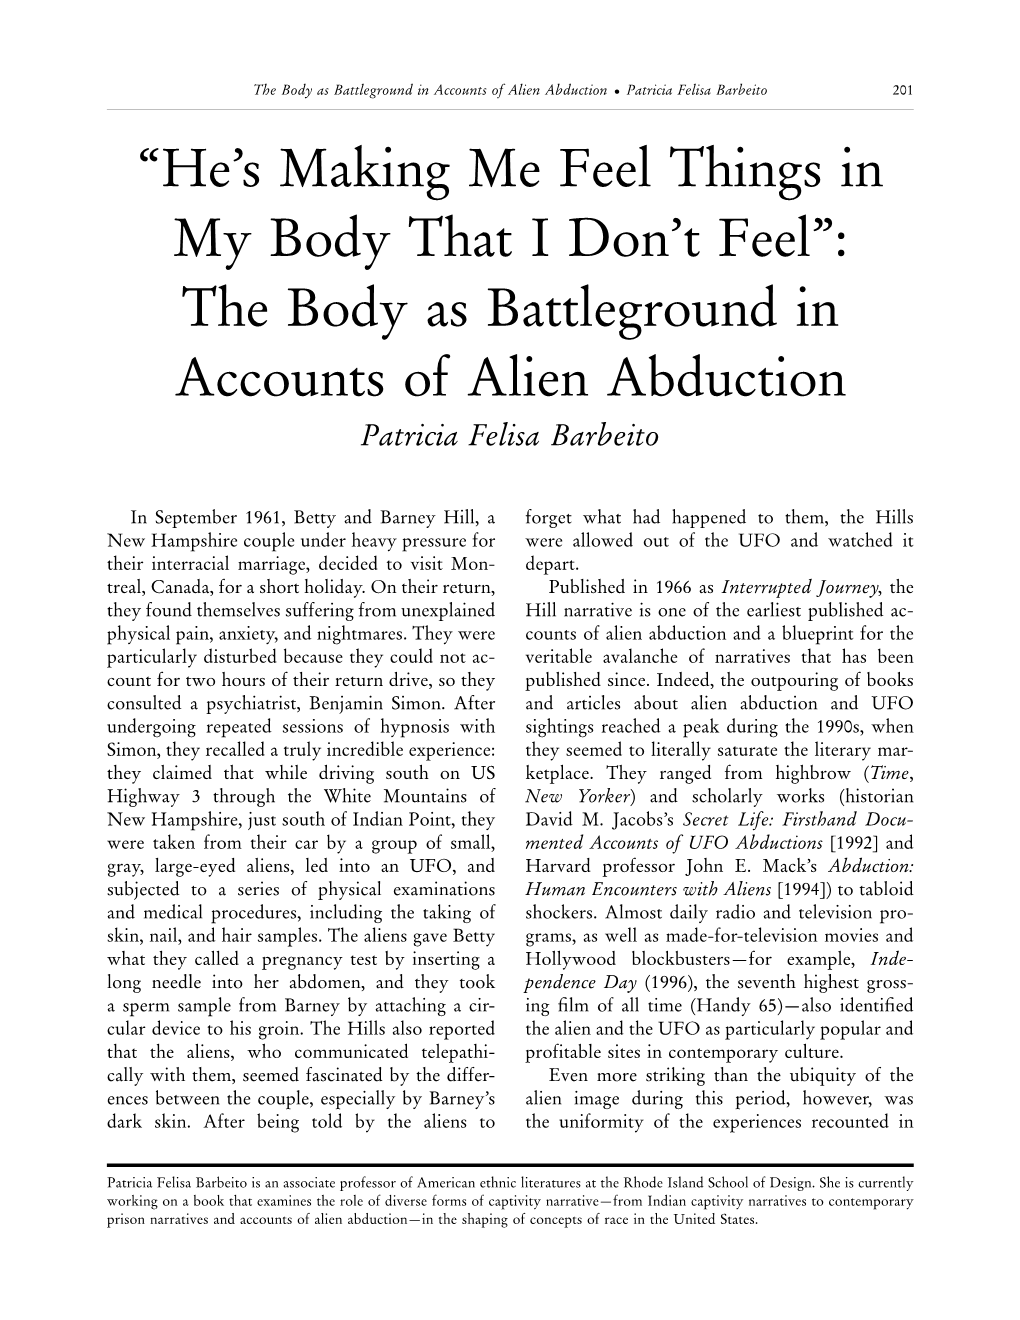 The Body As Battleground in Accounts of Alien Abduction